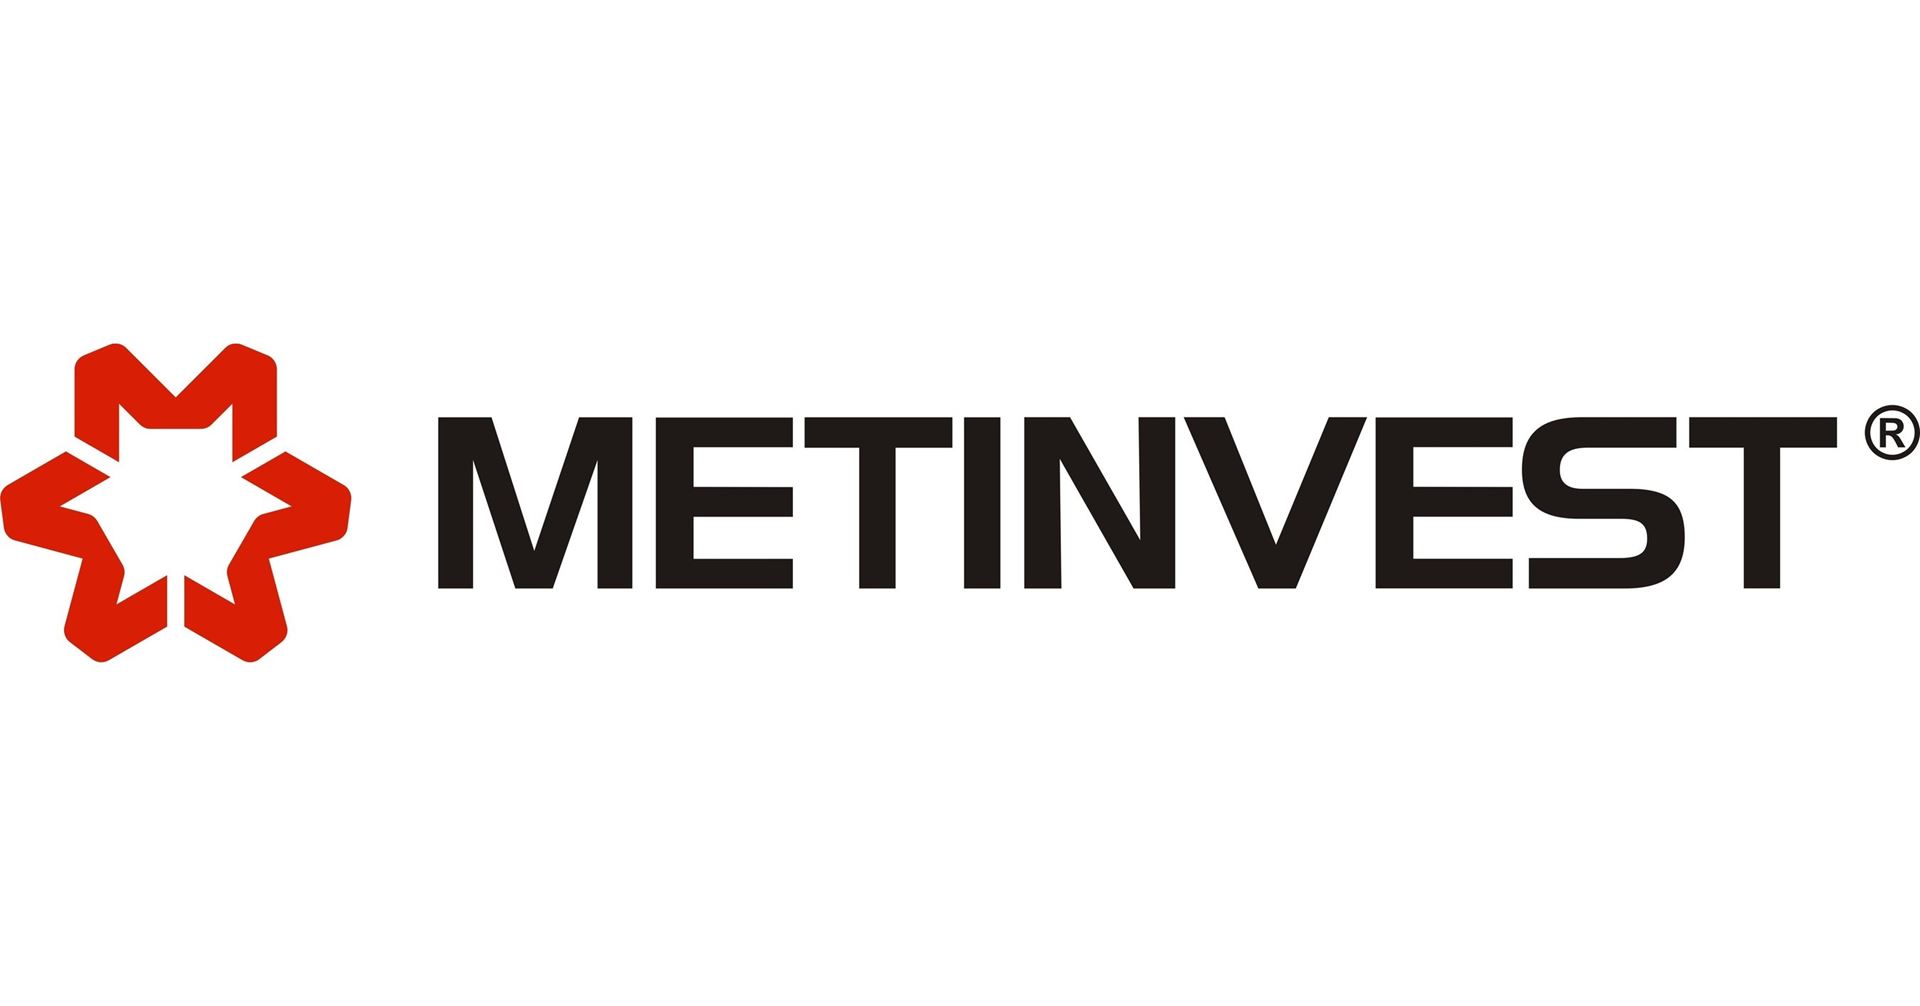 Metinvest announced a loss of 194 million dollars in 2023